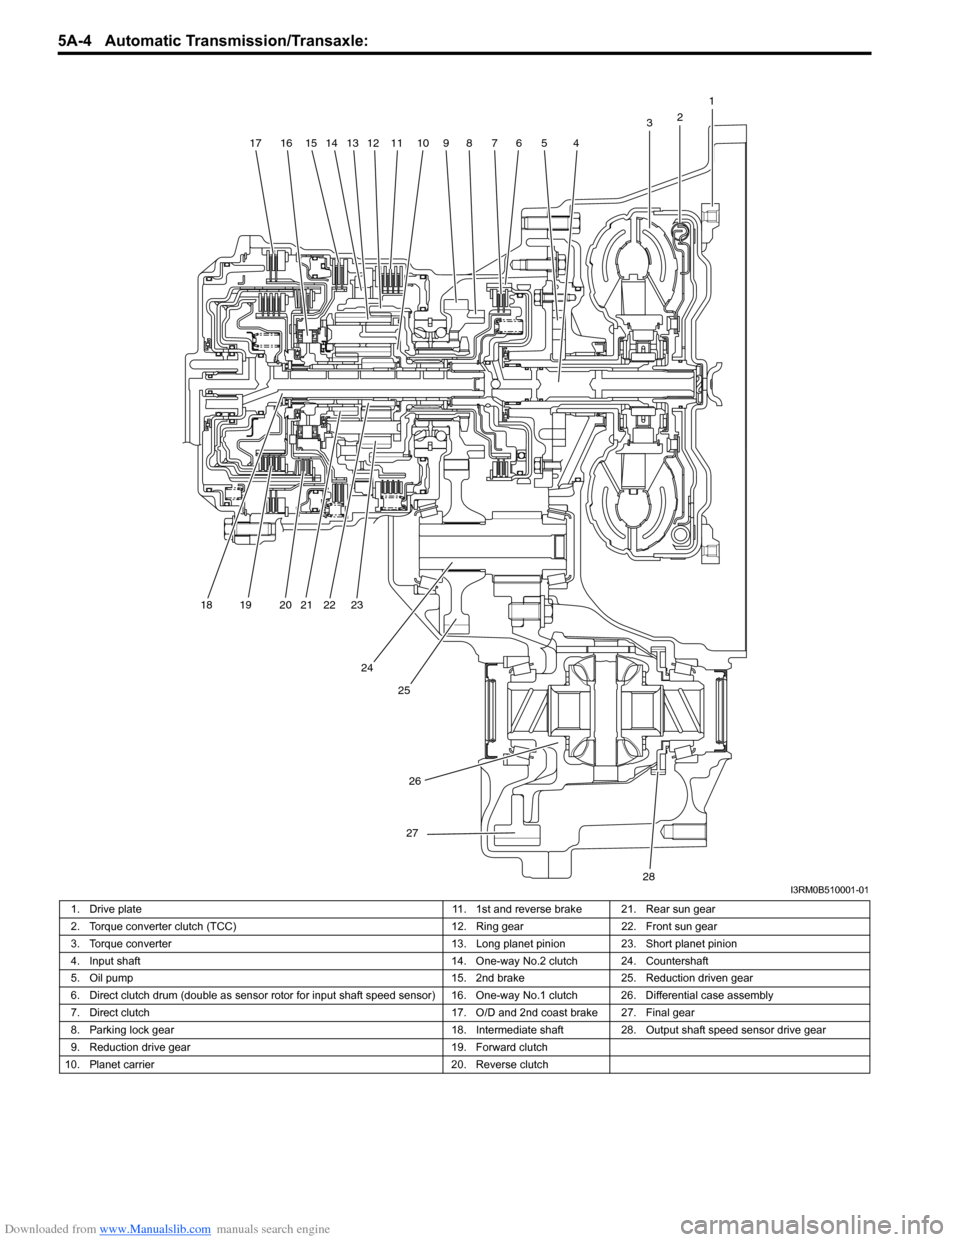 SUZUKI SWIFT 2008 2.G Service Workshop Manual Downloaded from www.Manualslib.com manuals search engine 5A-4 Automatic Transmission/Transaxle: 
1
2
3
4567891011121314151617
18 19 20 21 22 23
24 25
26
27
28I3RM0B510001-01
1. Drive plate 11. 1st and